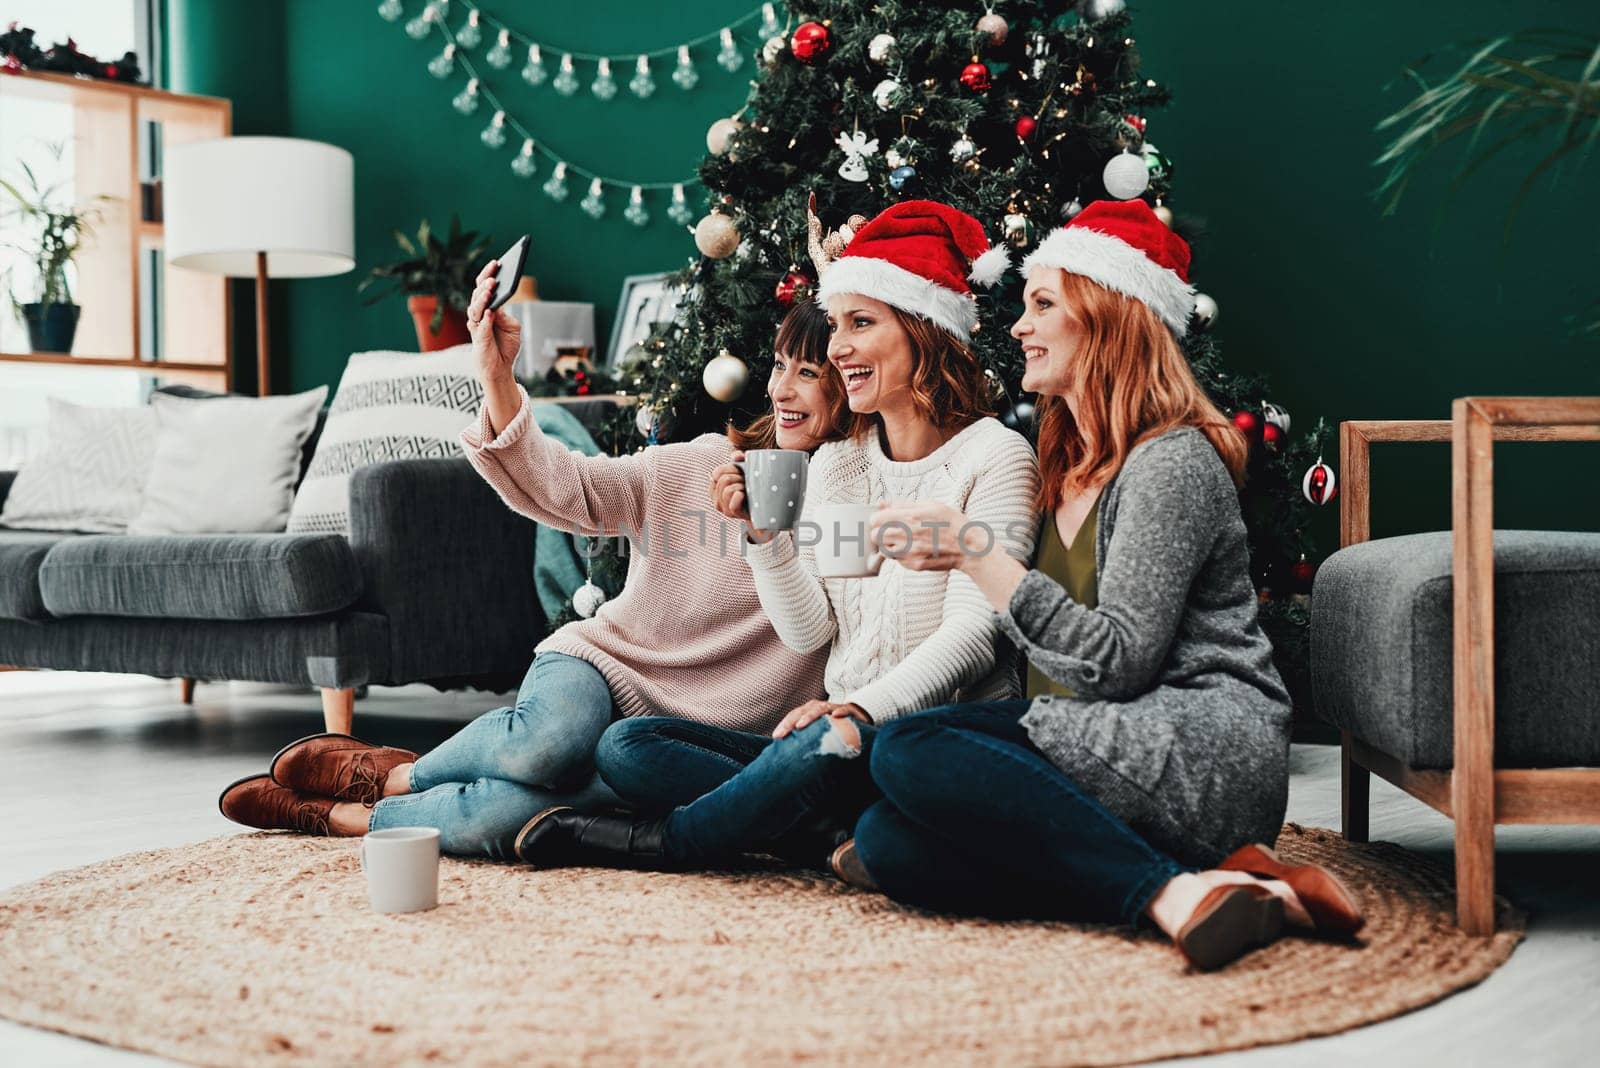 Capturing memories. three attractive middle aged women taking self portraits together with a cellphone at home during Christmas time